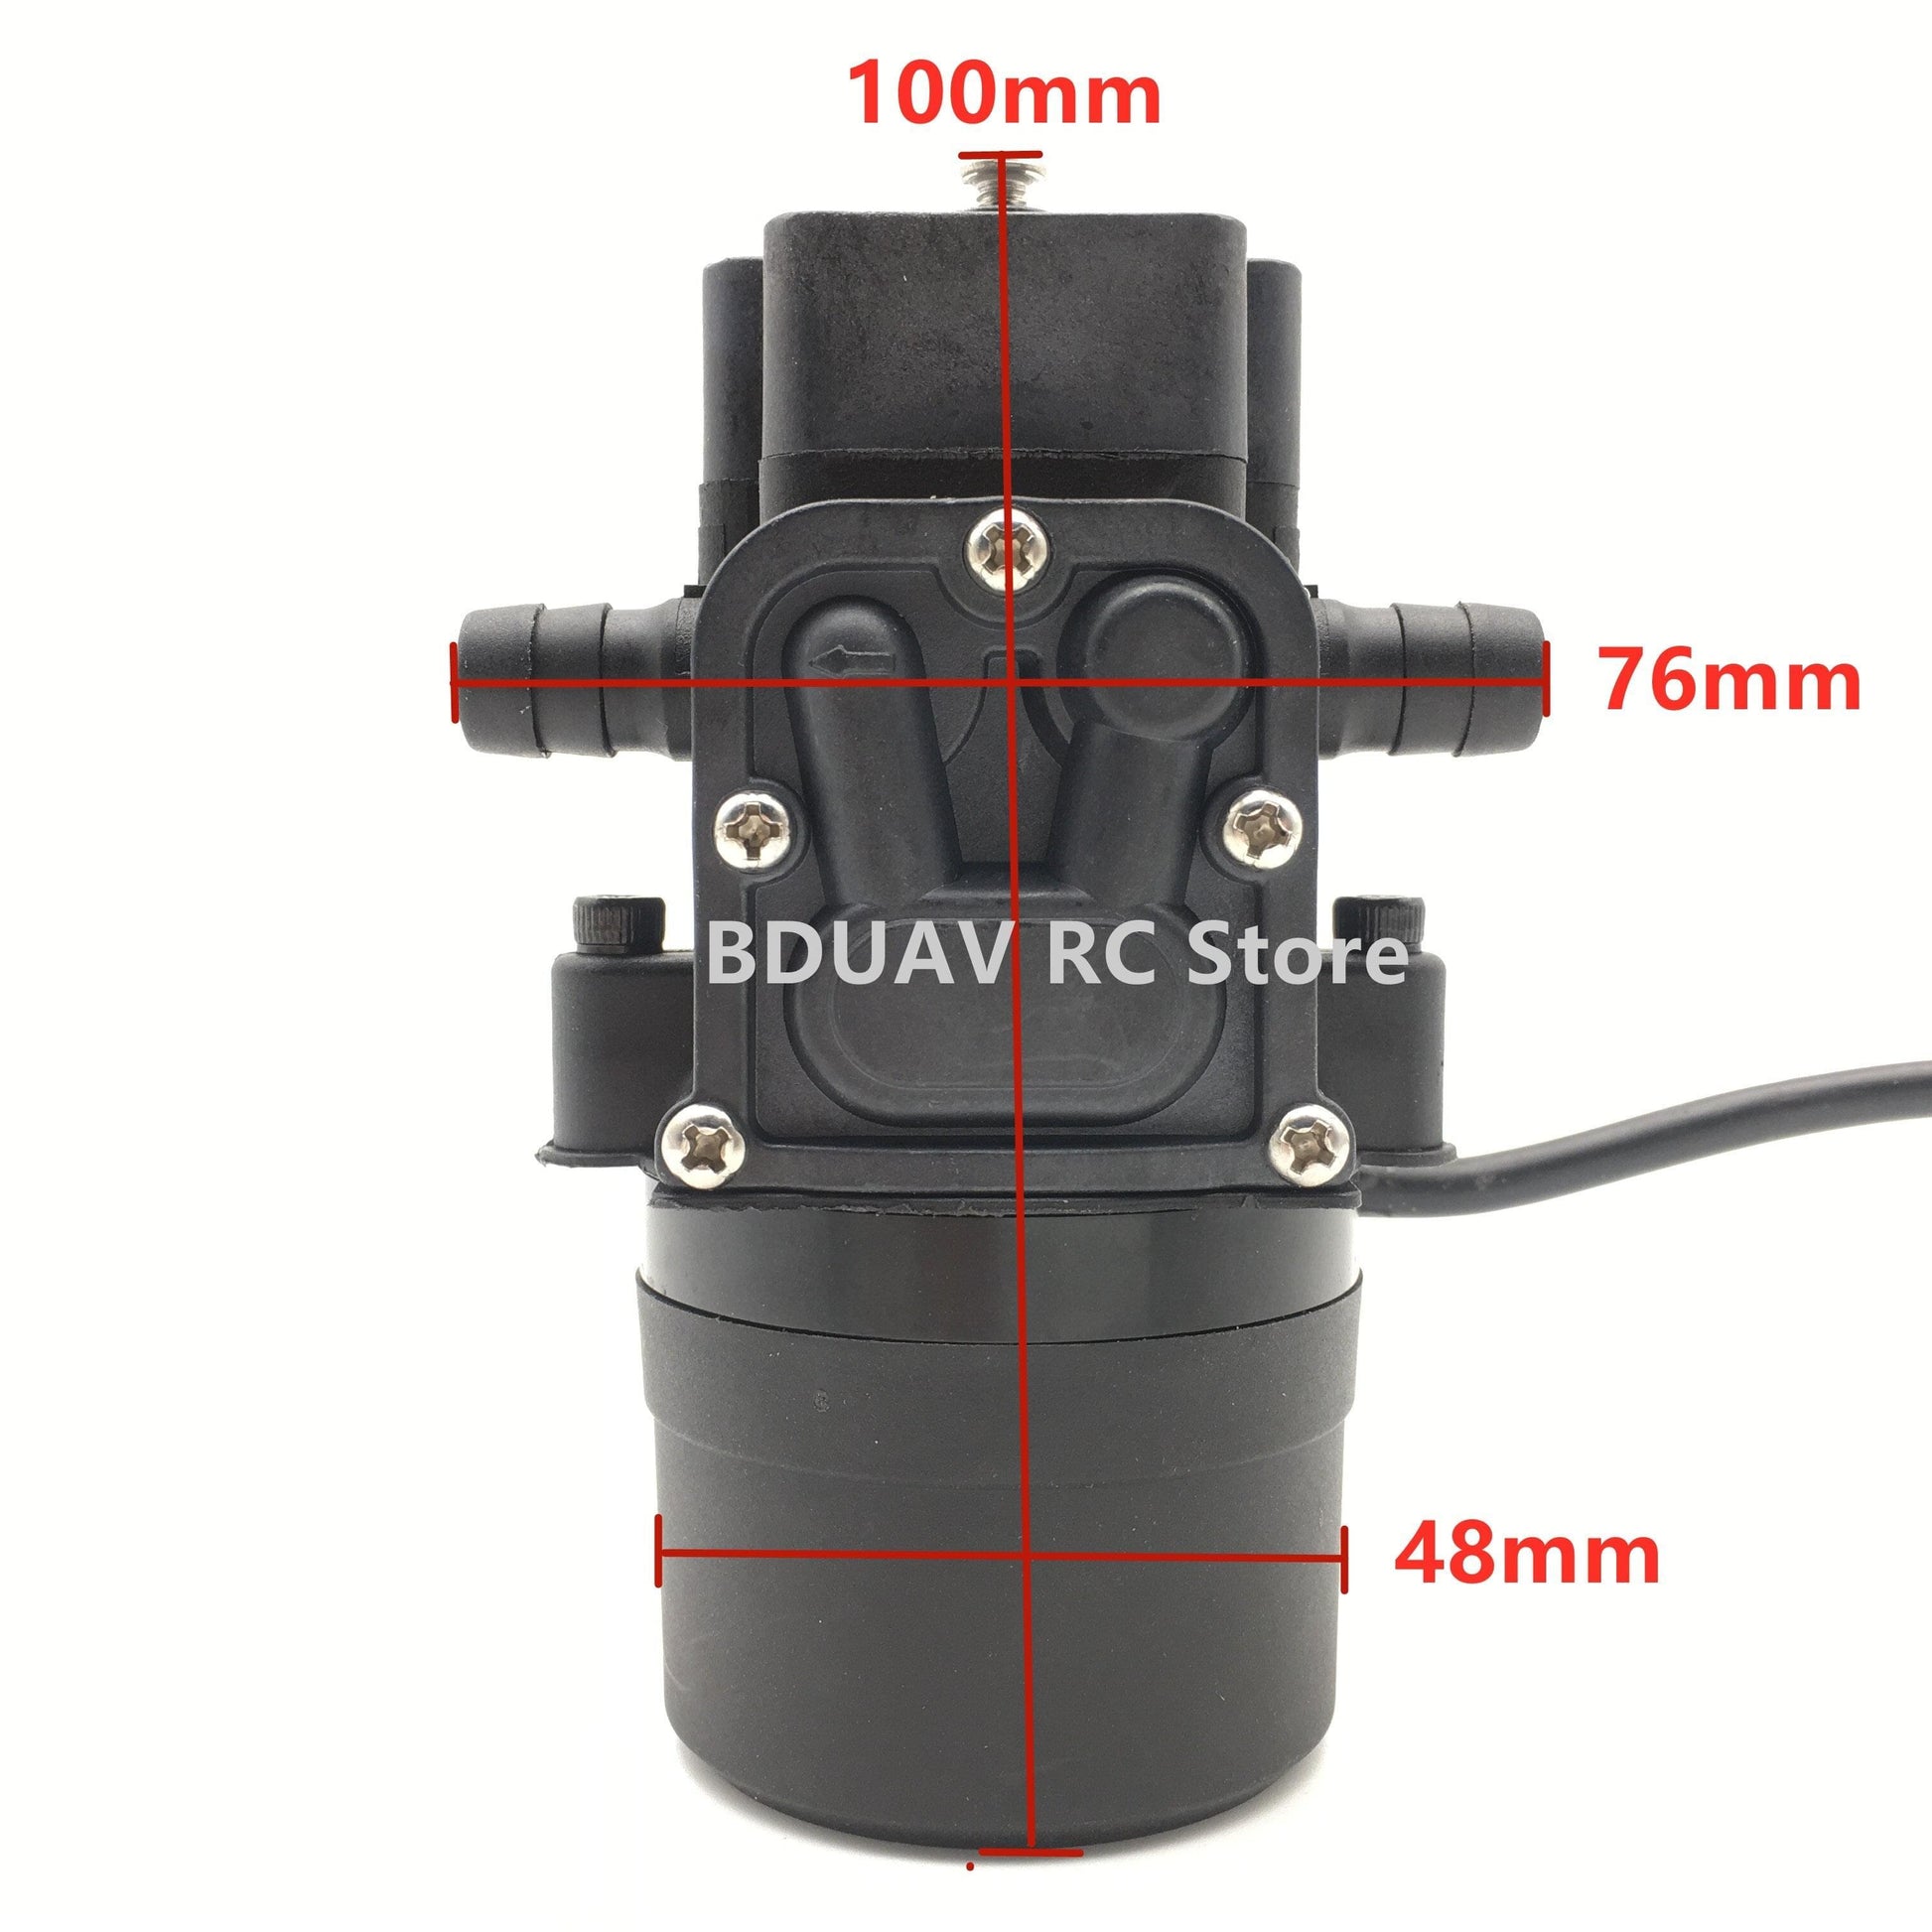 12S 14S DC44-56V mini brushless water pump built-in ESC low noise, long life for Agricultural spraying drone - RCDrone